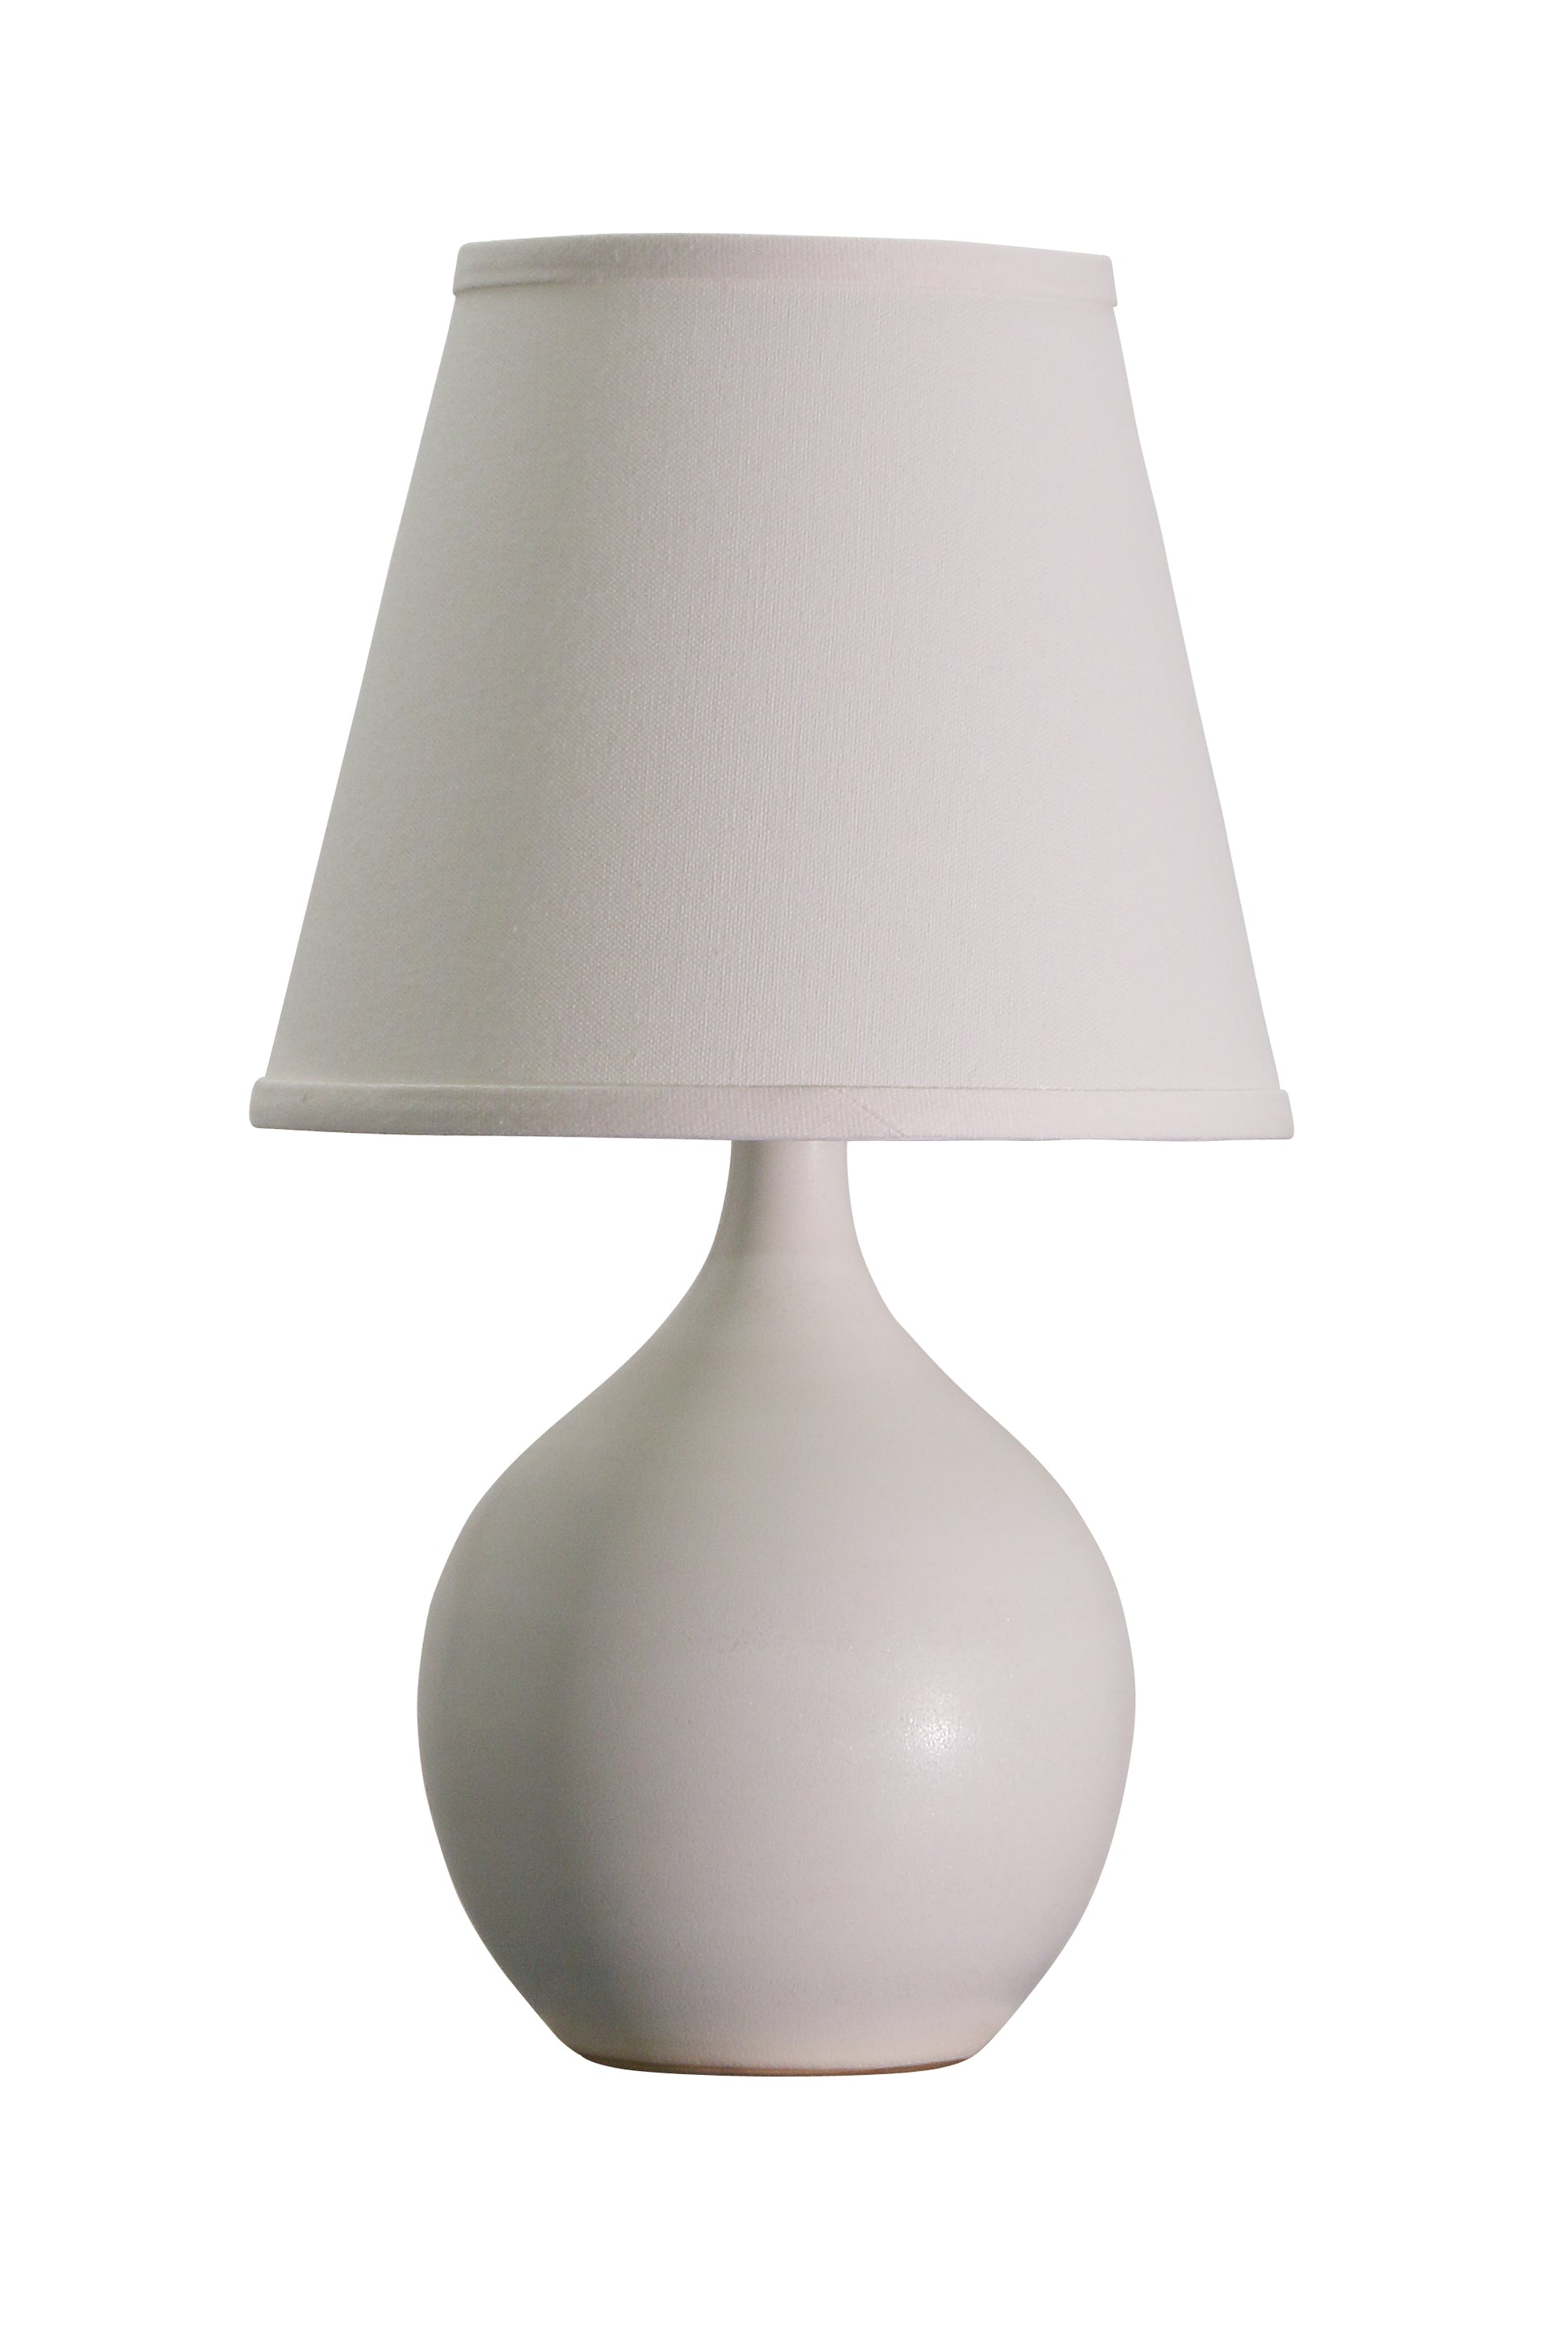 House of Troy Scatchard 13.5" Mini Accent Lamp in White Matte GS50-WM